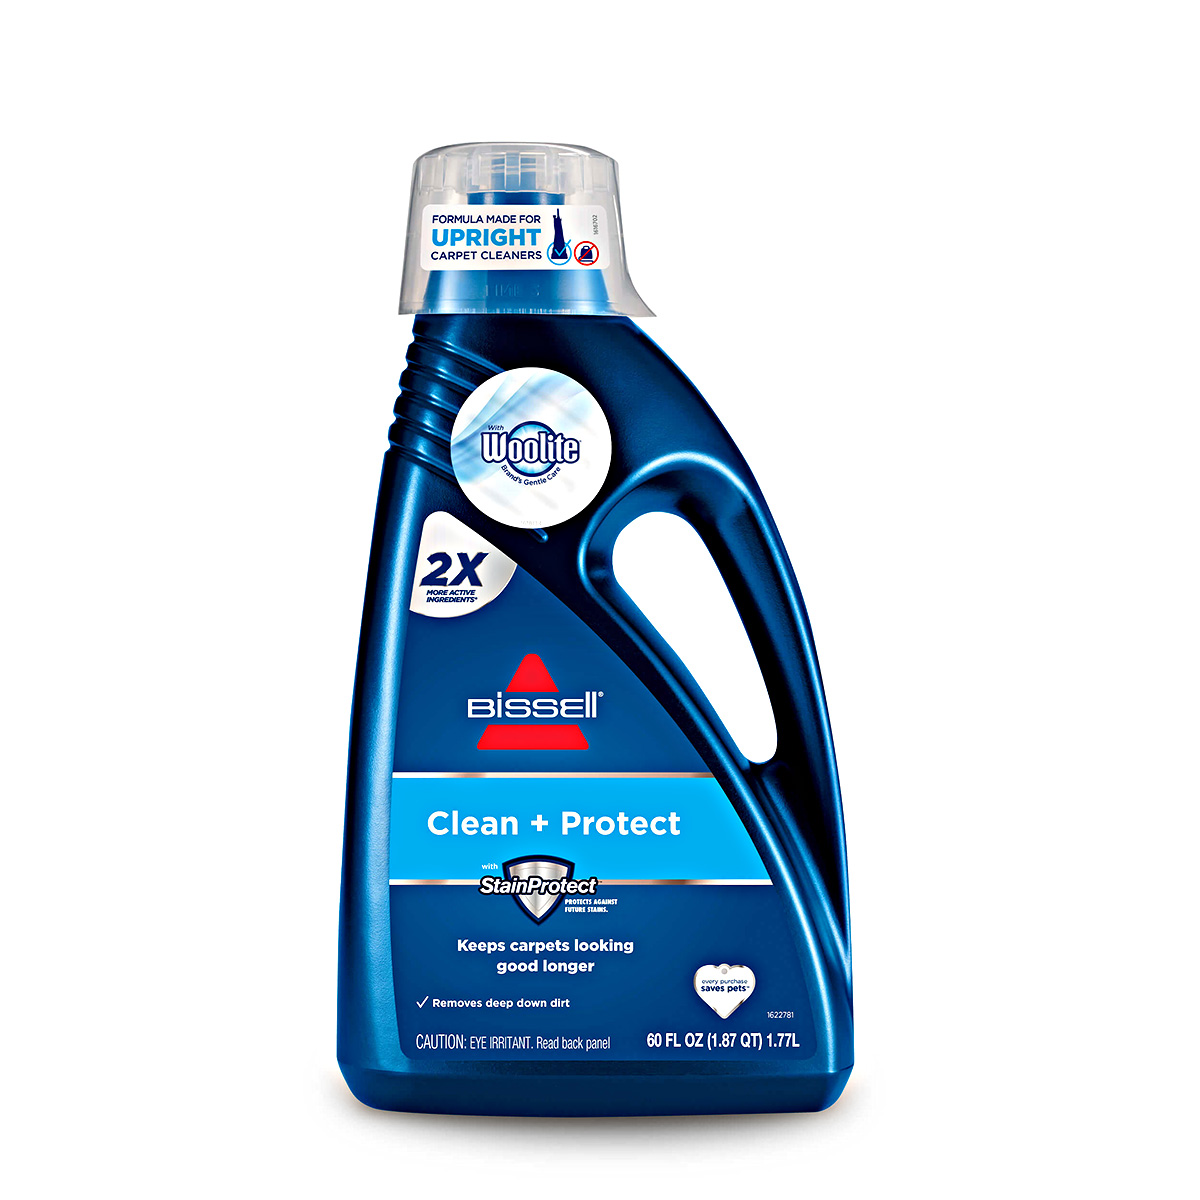 Where Can I Buy Bissell Carpet Cleaning Solution